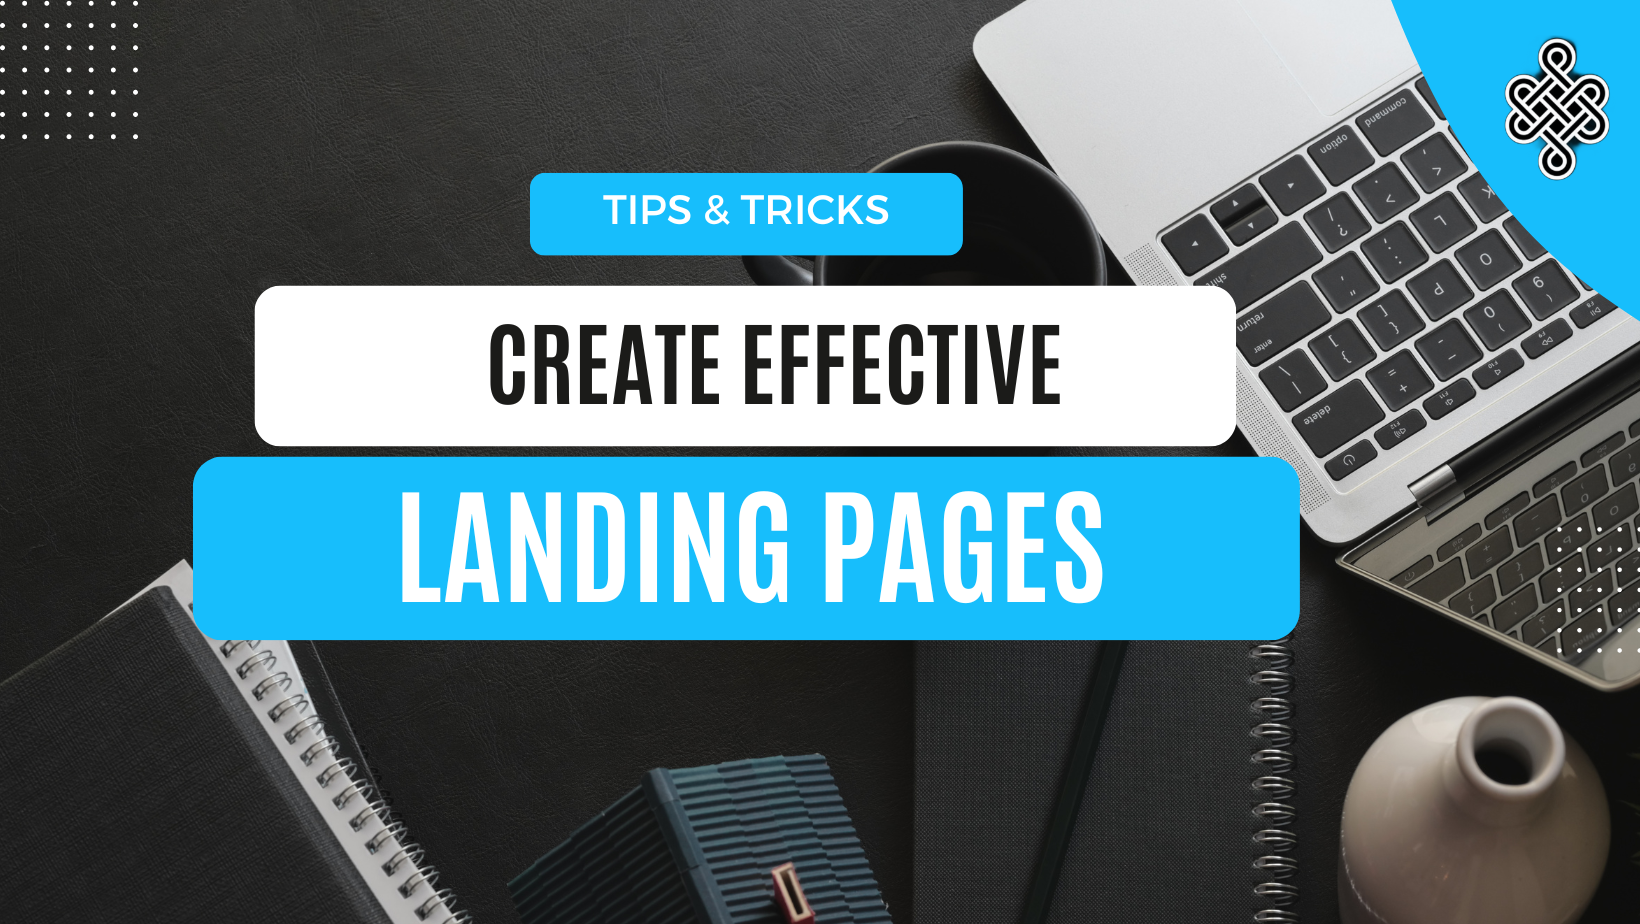 7 Steps to Creating Effective Landing Pages for Your Digital Marketing Campaigns